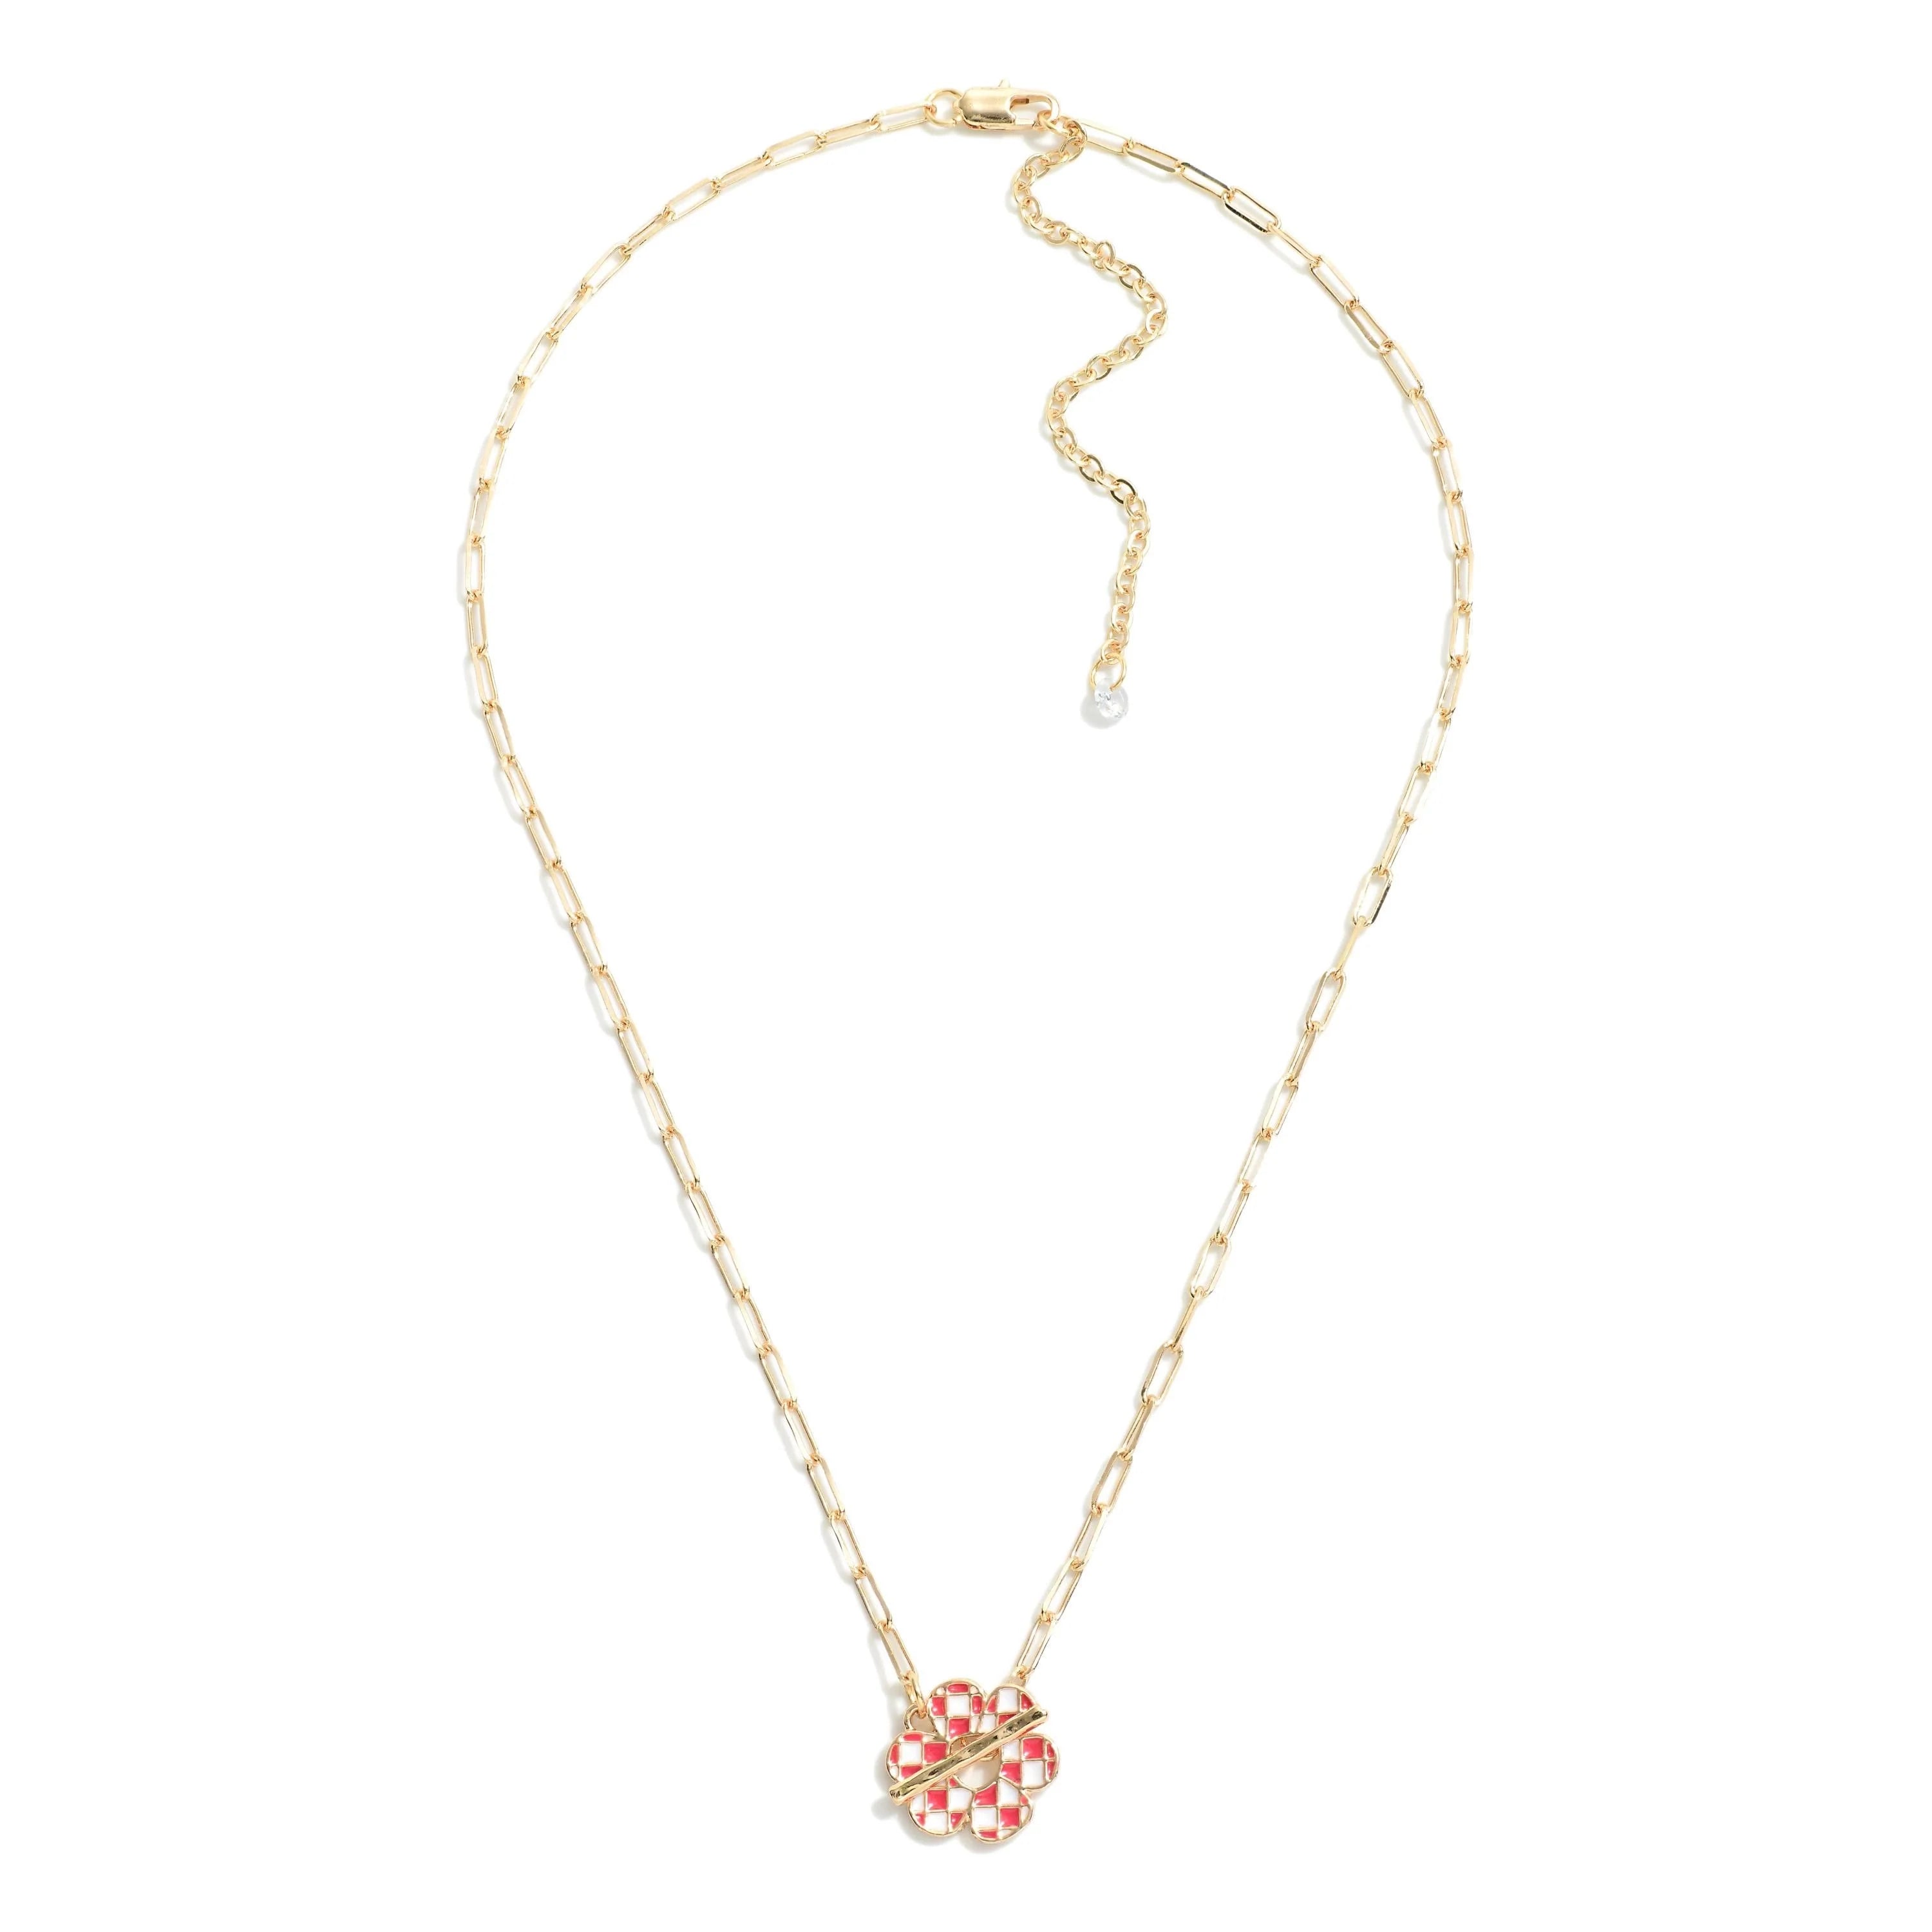 Checkered Enamel Flower Necklace With Toggle Clasp